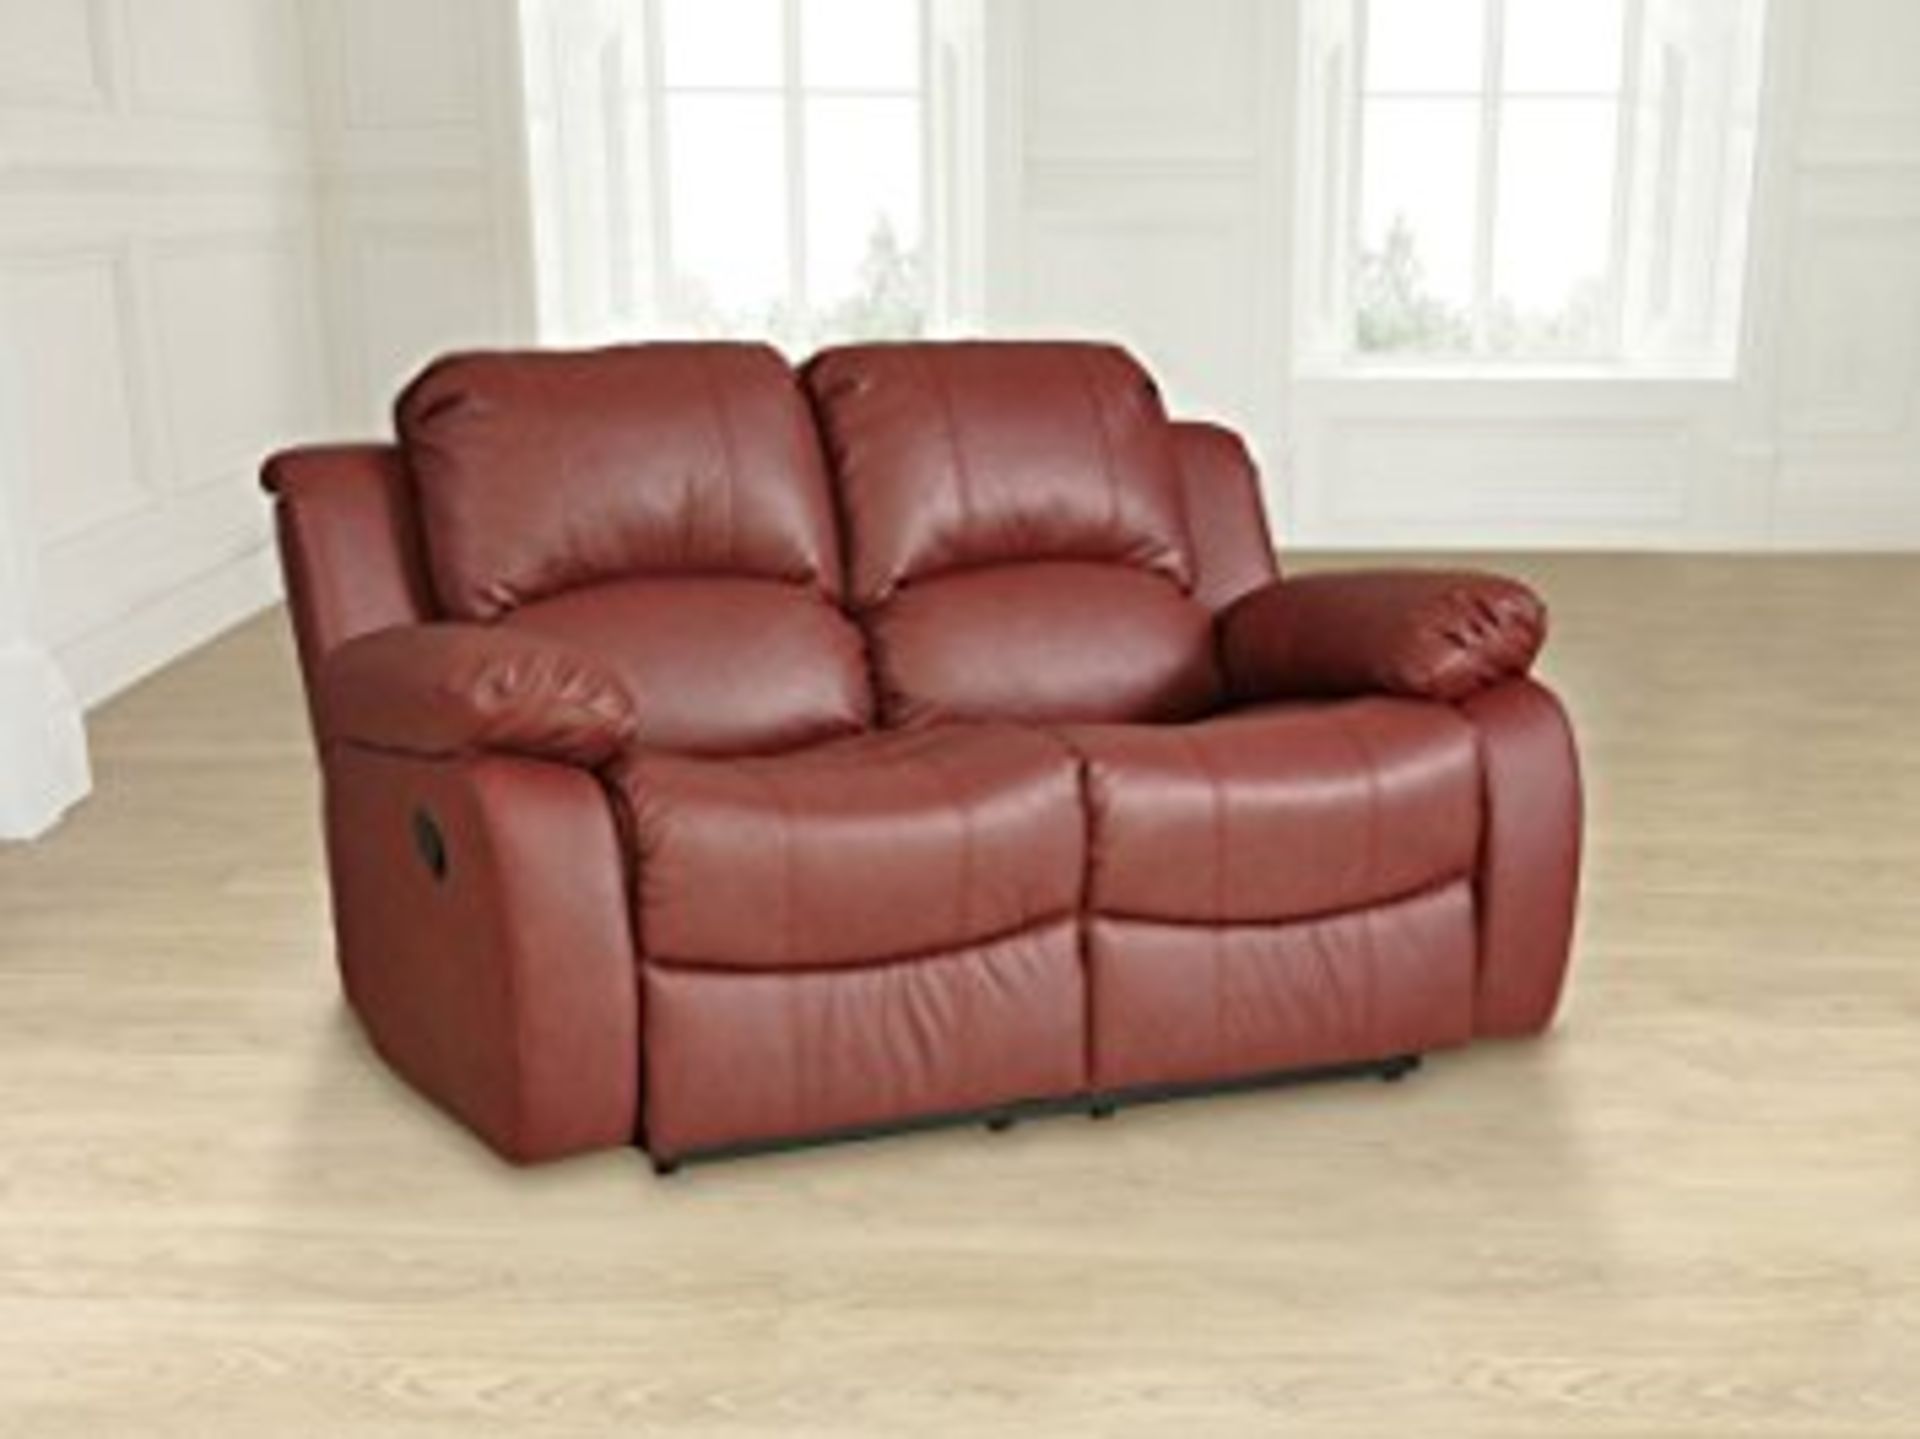 Supreme Valance burgandy leather 3 seater reclining sofa with console - Image 2 of 3